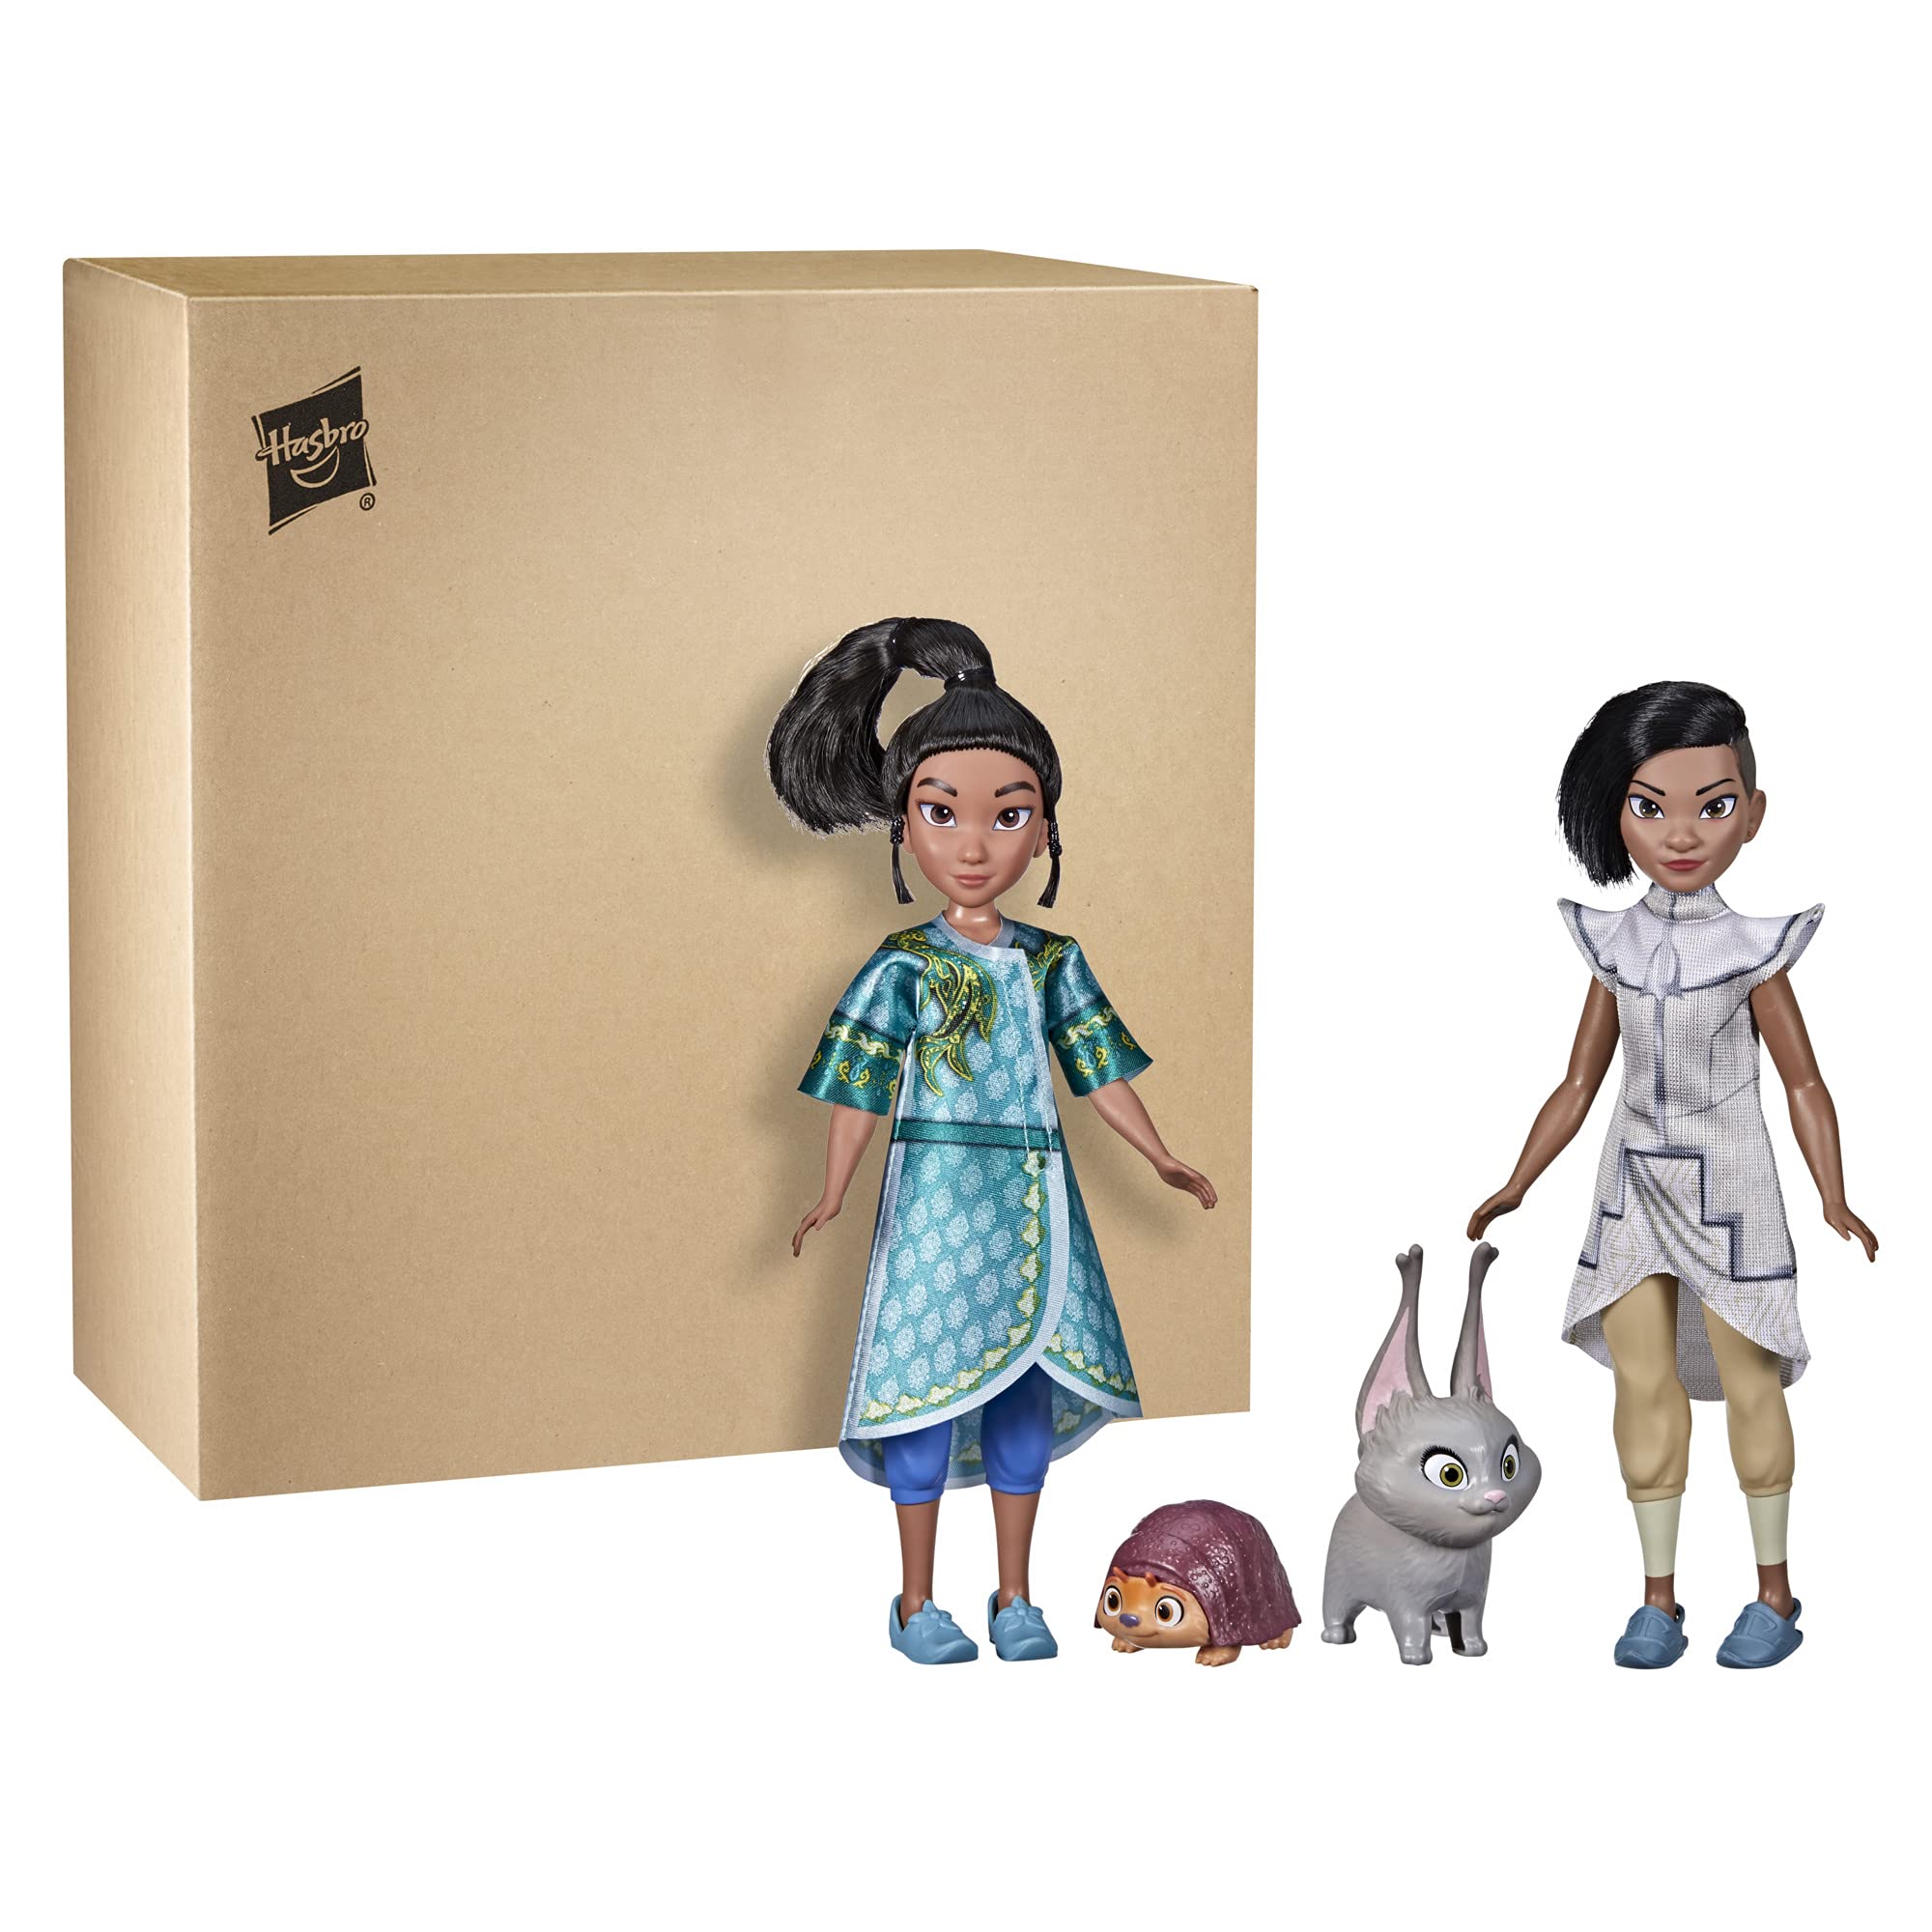 Disney Princess Raya and The Last Dragon Young Raya and Namaari Fashion Dolls 2-Pack, Fashion Doll Clothes, Toy for Kids 3 and up (Pack of 1)